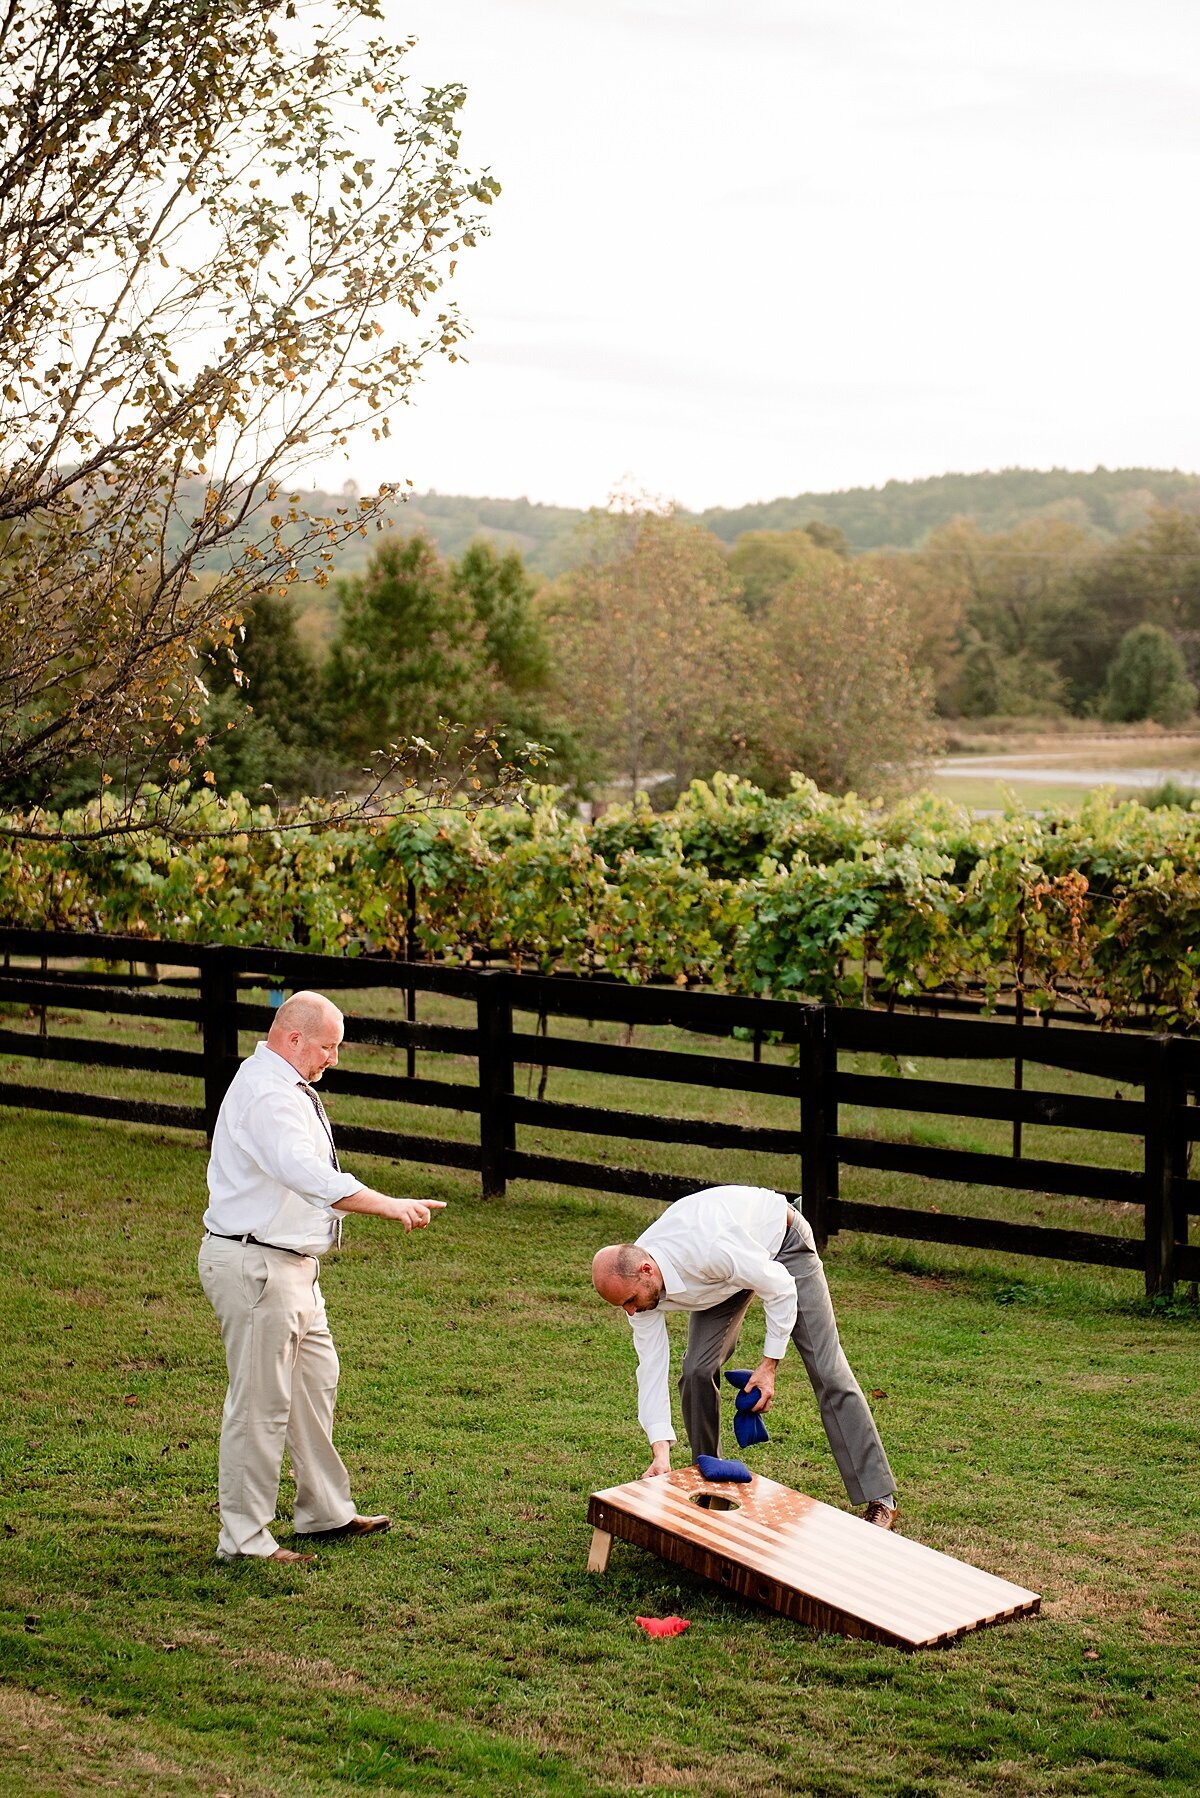 Two wedding guests wearing khakis and white shirts playing cornhole at an Arrington Vineyard wedding reception. They are standing next to a horse fence where the grape vines grow in the sunshine.